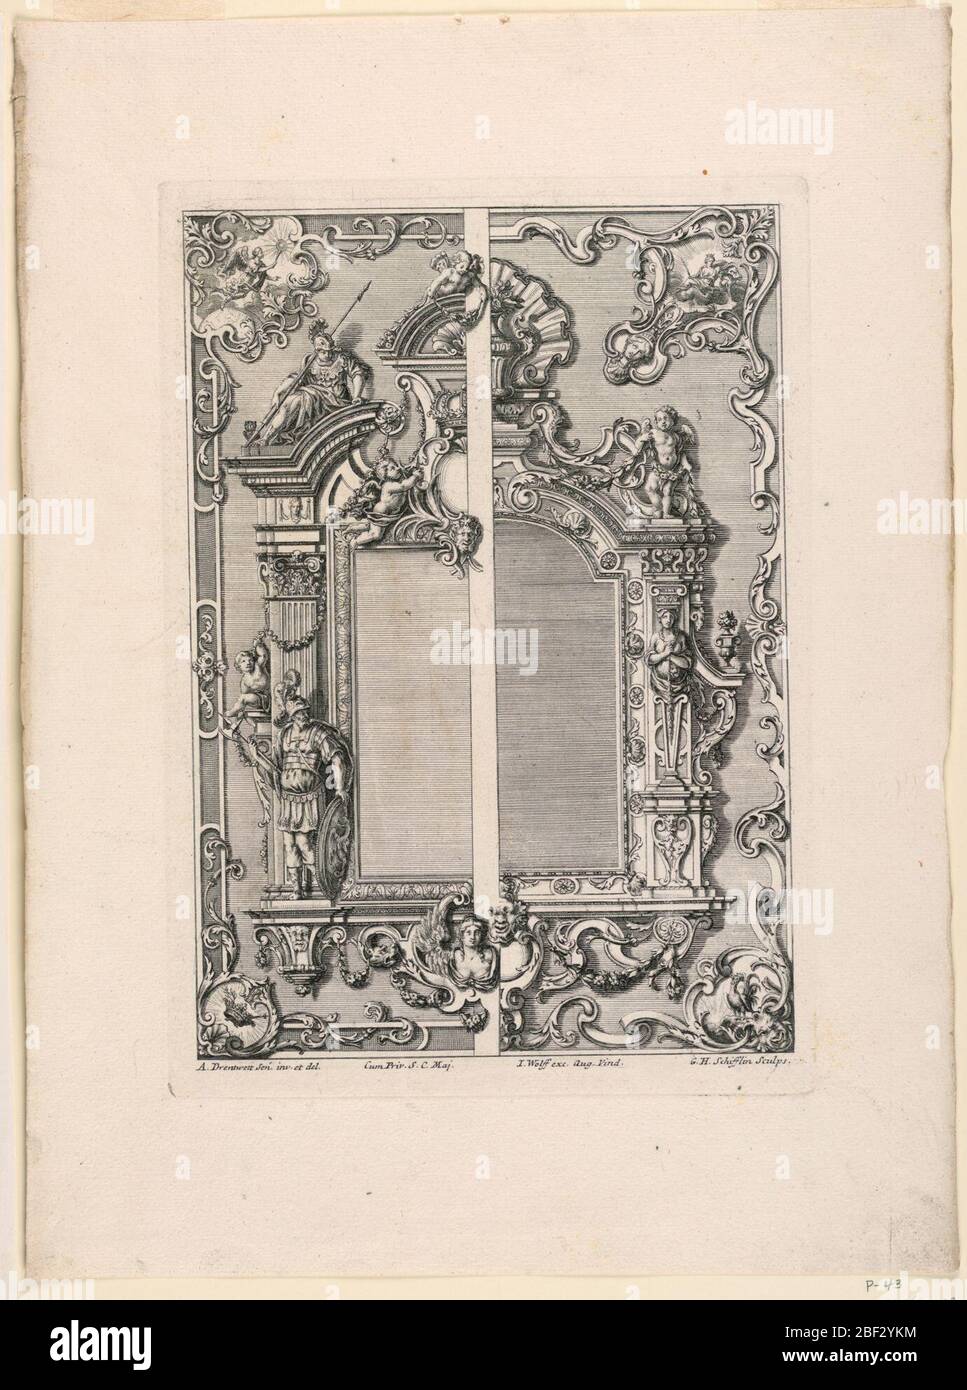 Unterschiedlich Augspurgische Goldschmidts Arbeit Large Frame Design Two Chairs and Wall Sconces Plate 6. Stock Photo